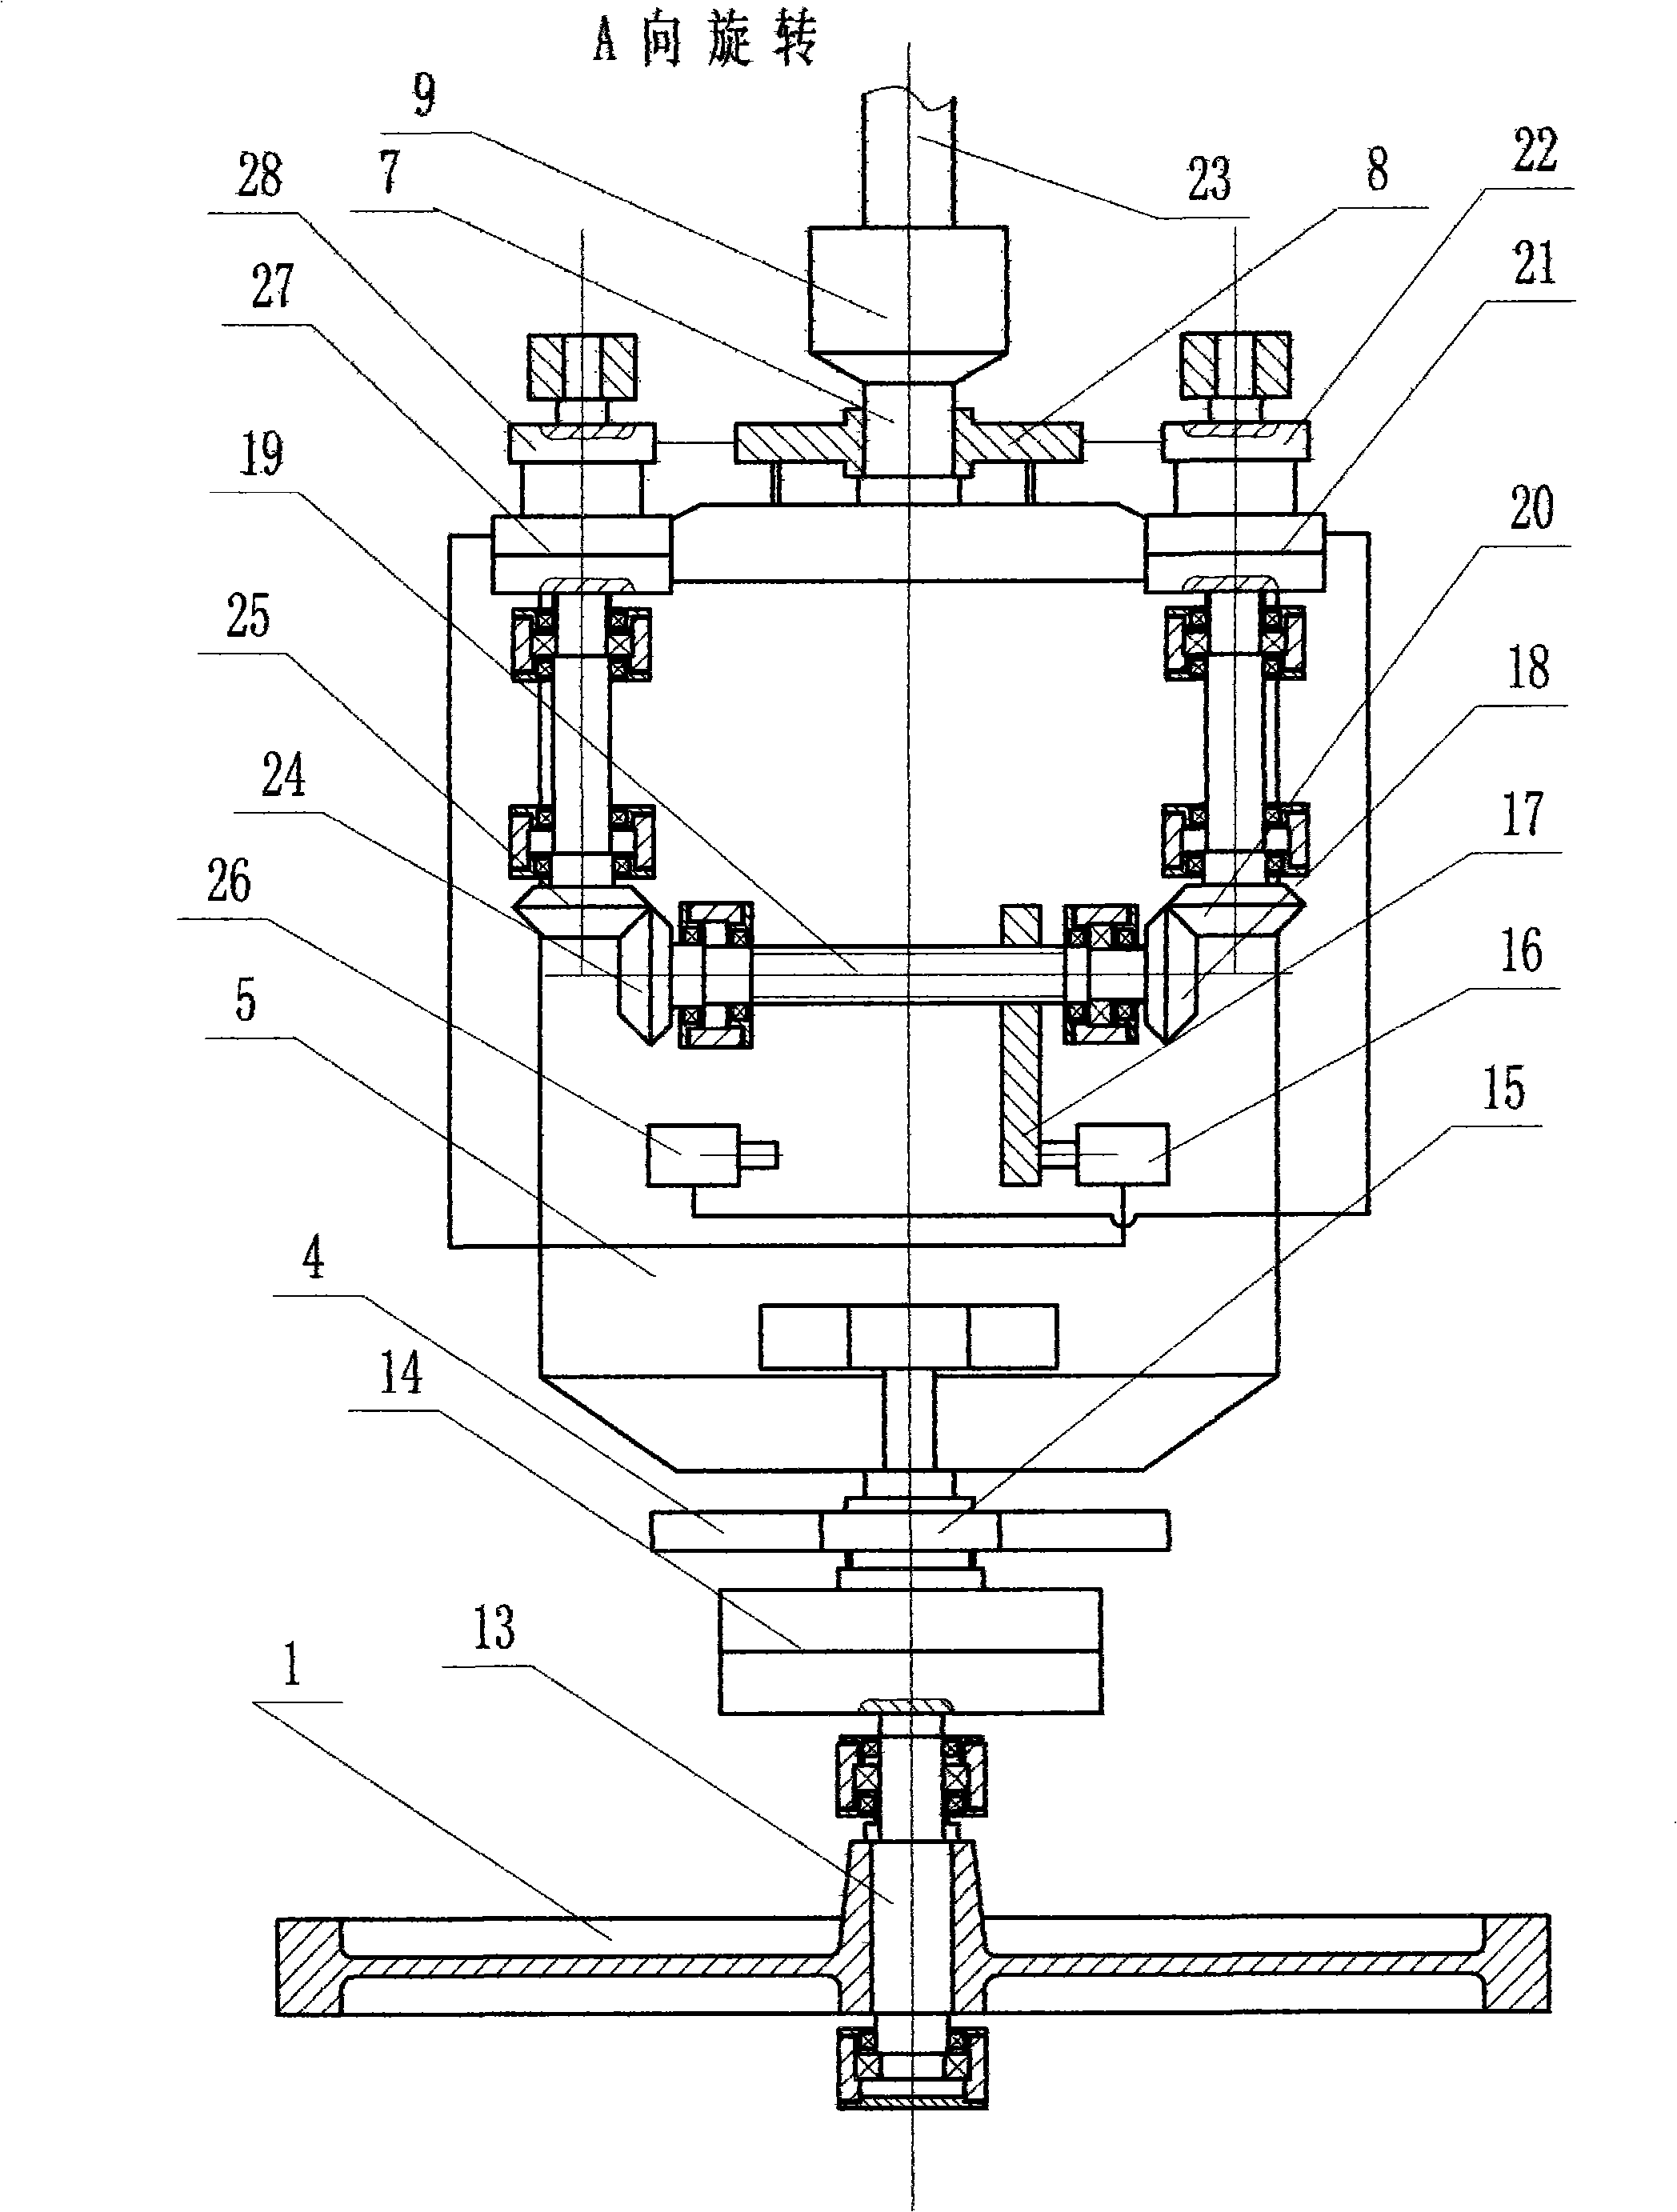 Energy-storing and releasing device for braking